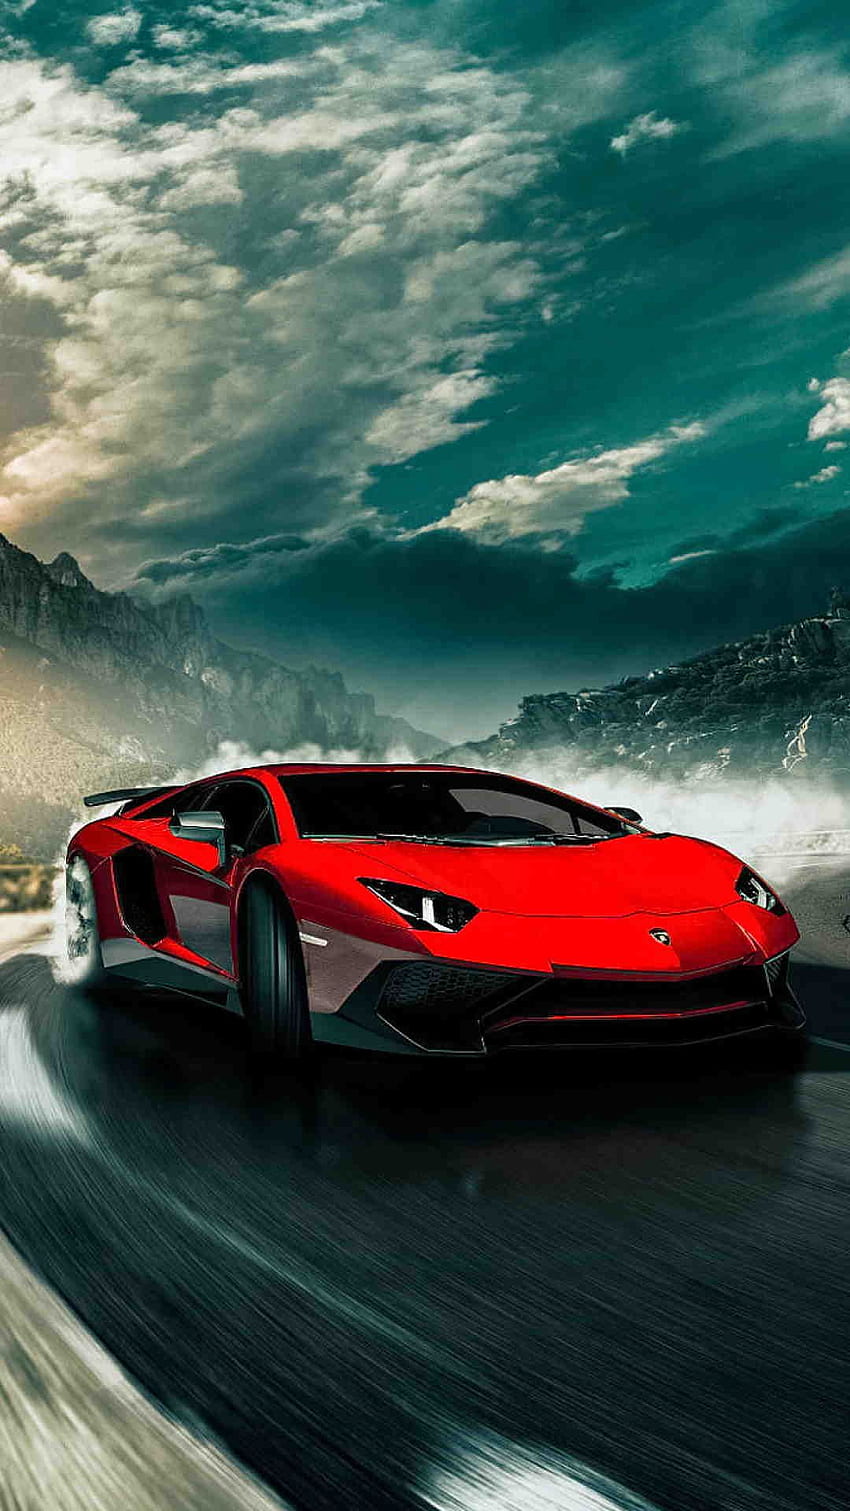 Of 2017 Lamborghini Aventador SV LP750 4 For Android And IPhone 6 Plus. Lamborghini Cars, Red Lamborghini, Super Luxury Cars HD phone wallpaper